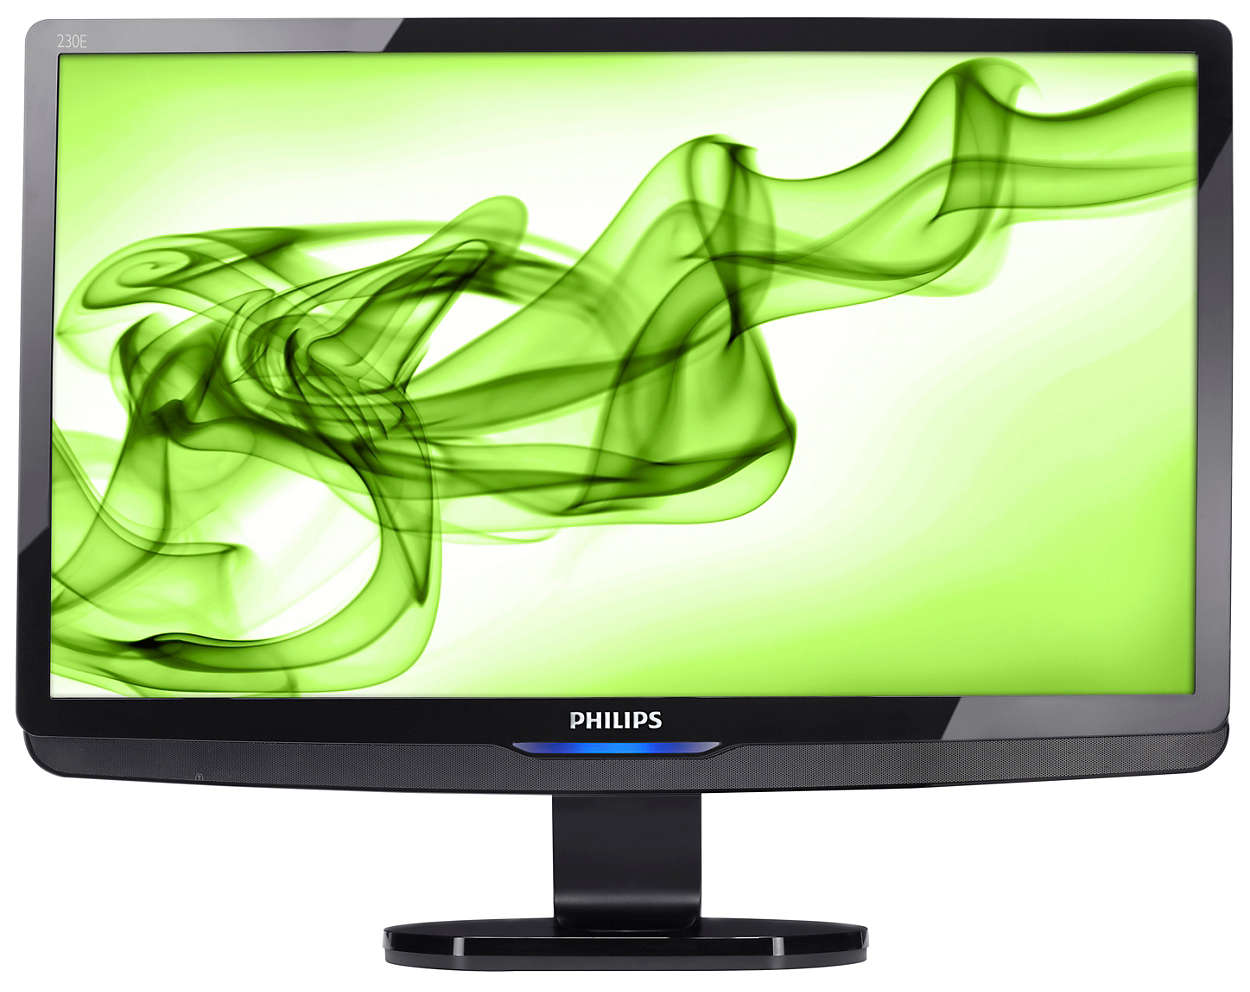 HDMI display for Full-HD entertainment